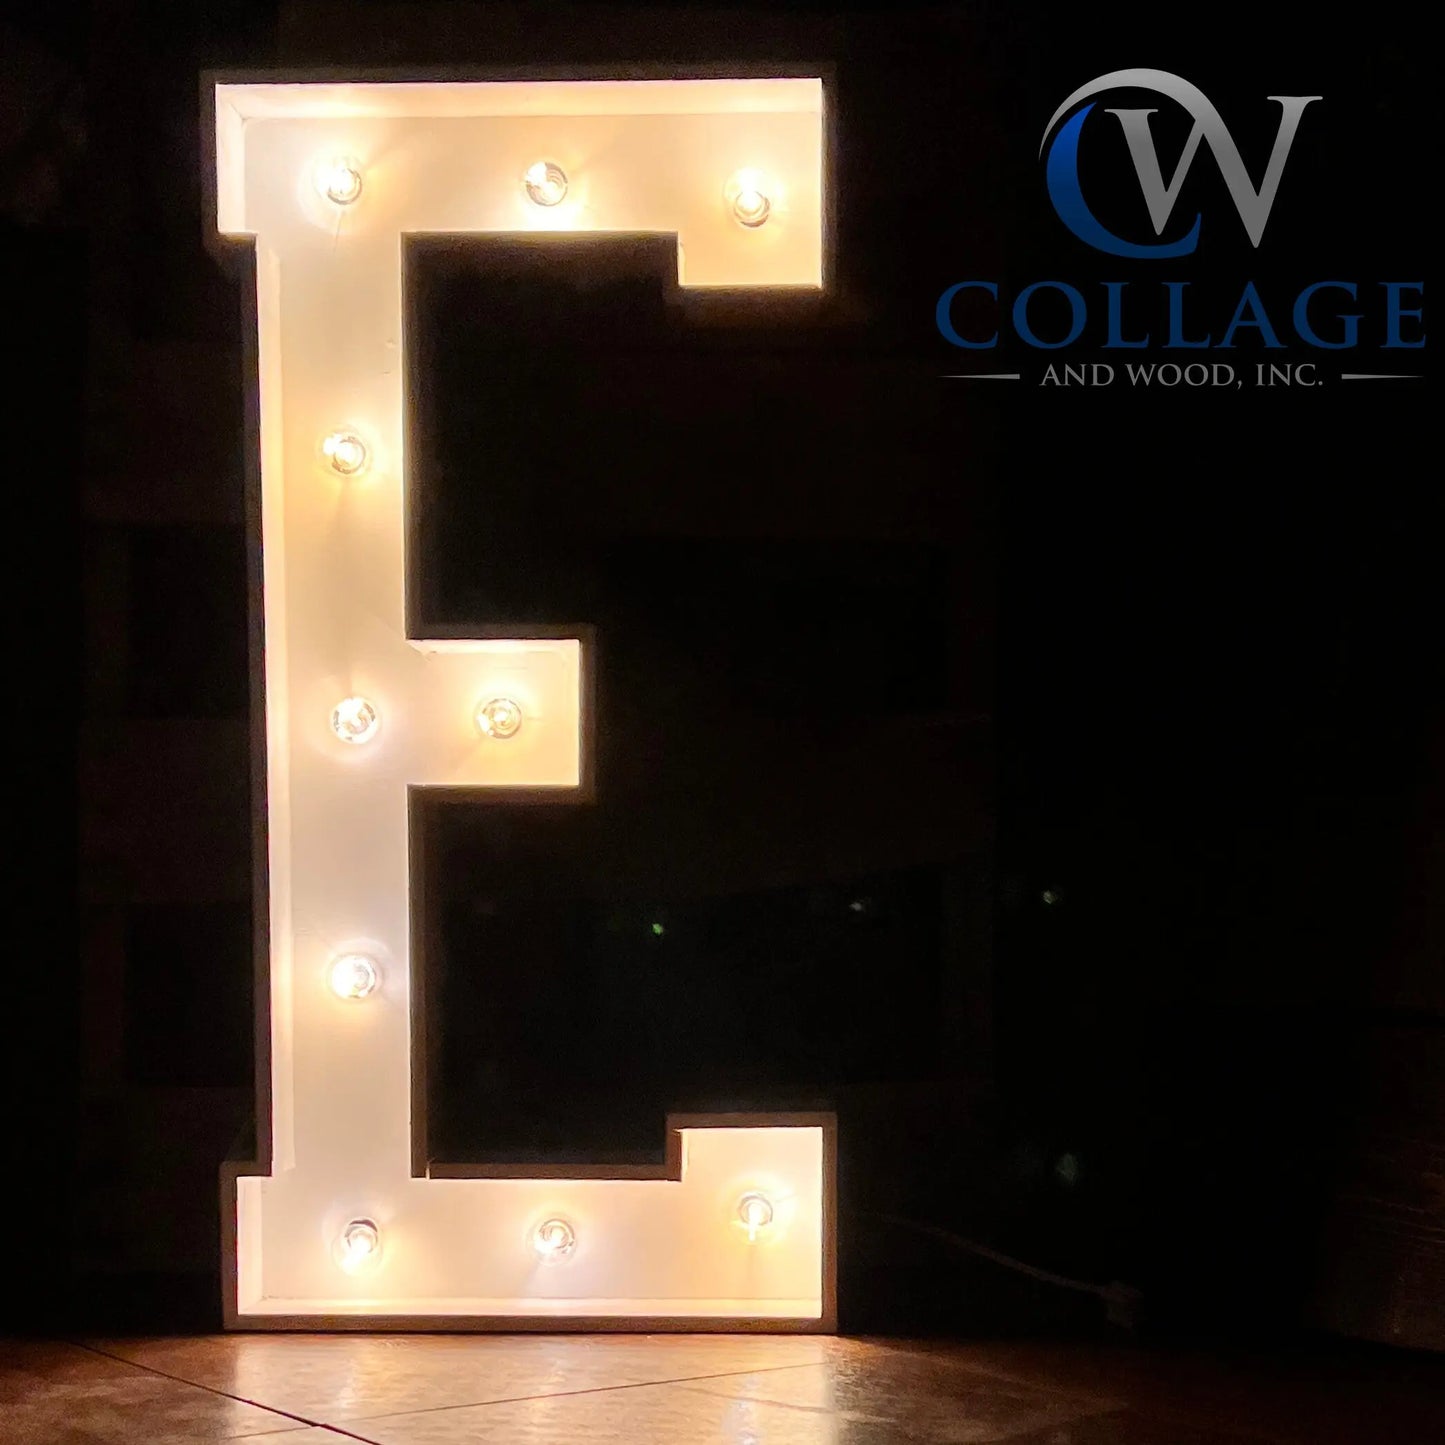 E - Exquisite 3-foot tall wooden marquee letter E, finished in a pristine white, featuring vibrant battery-powered LED lights.